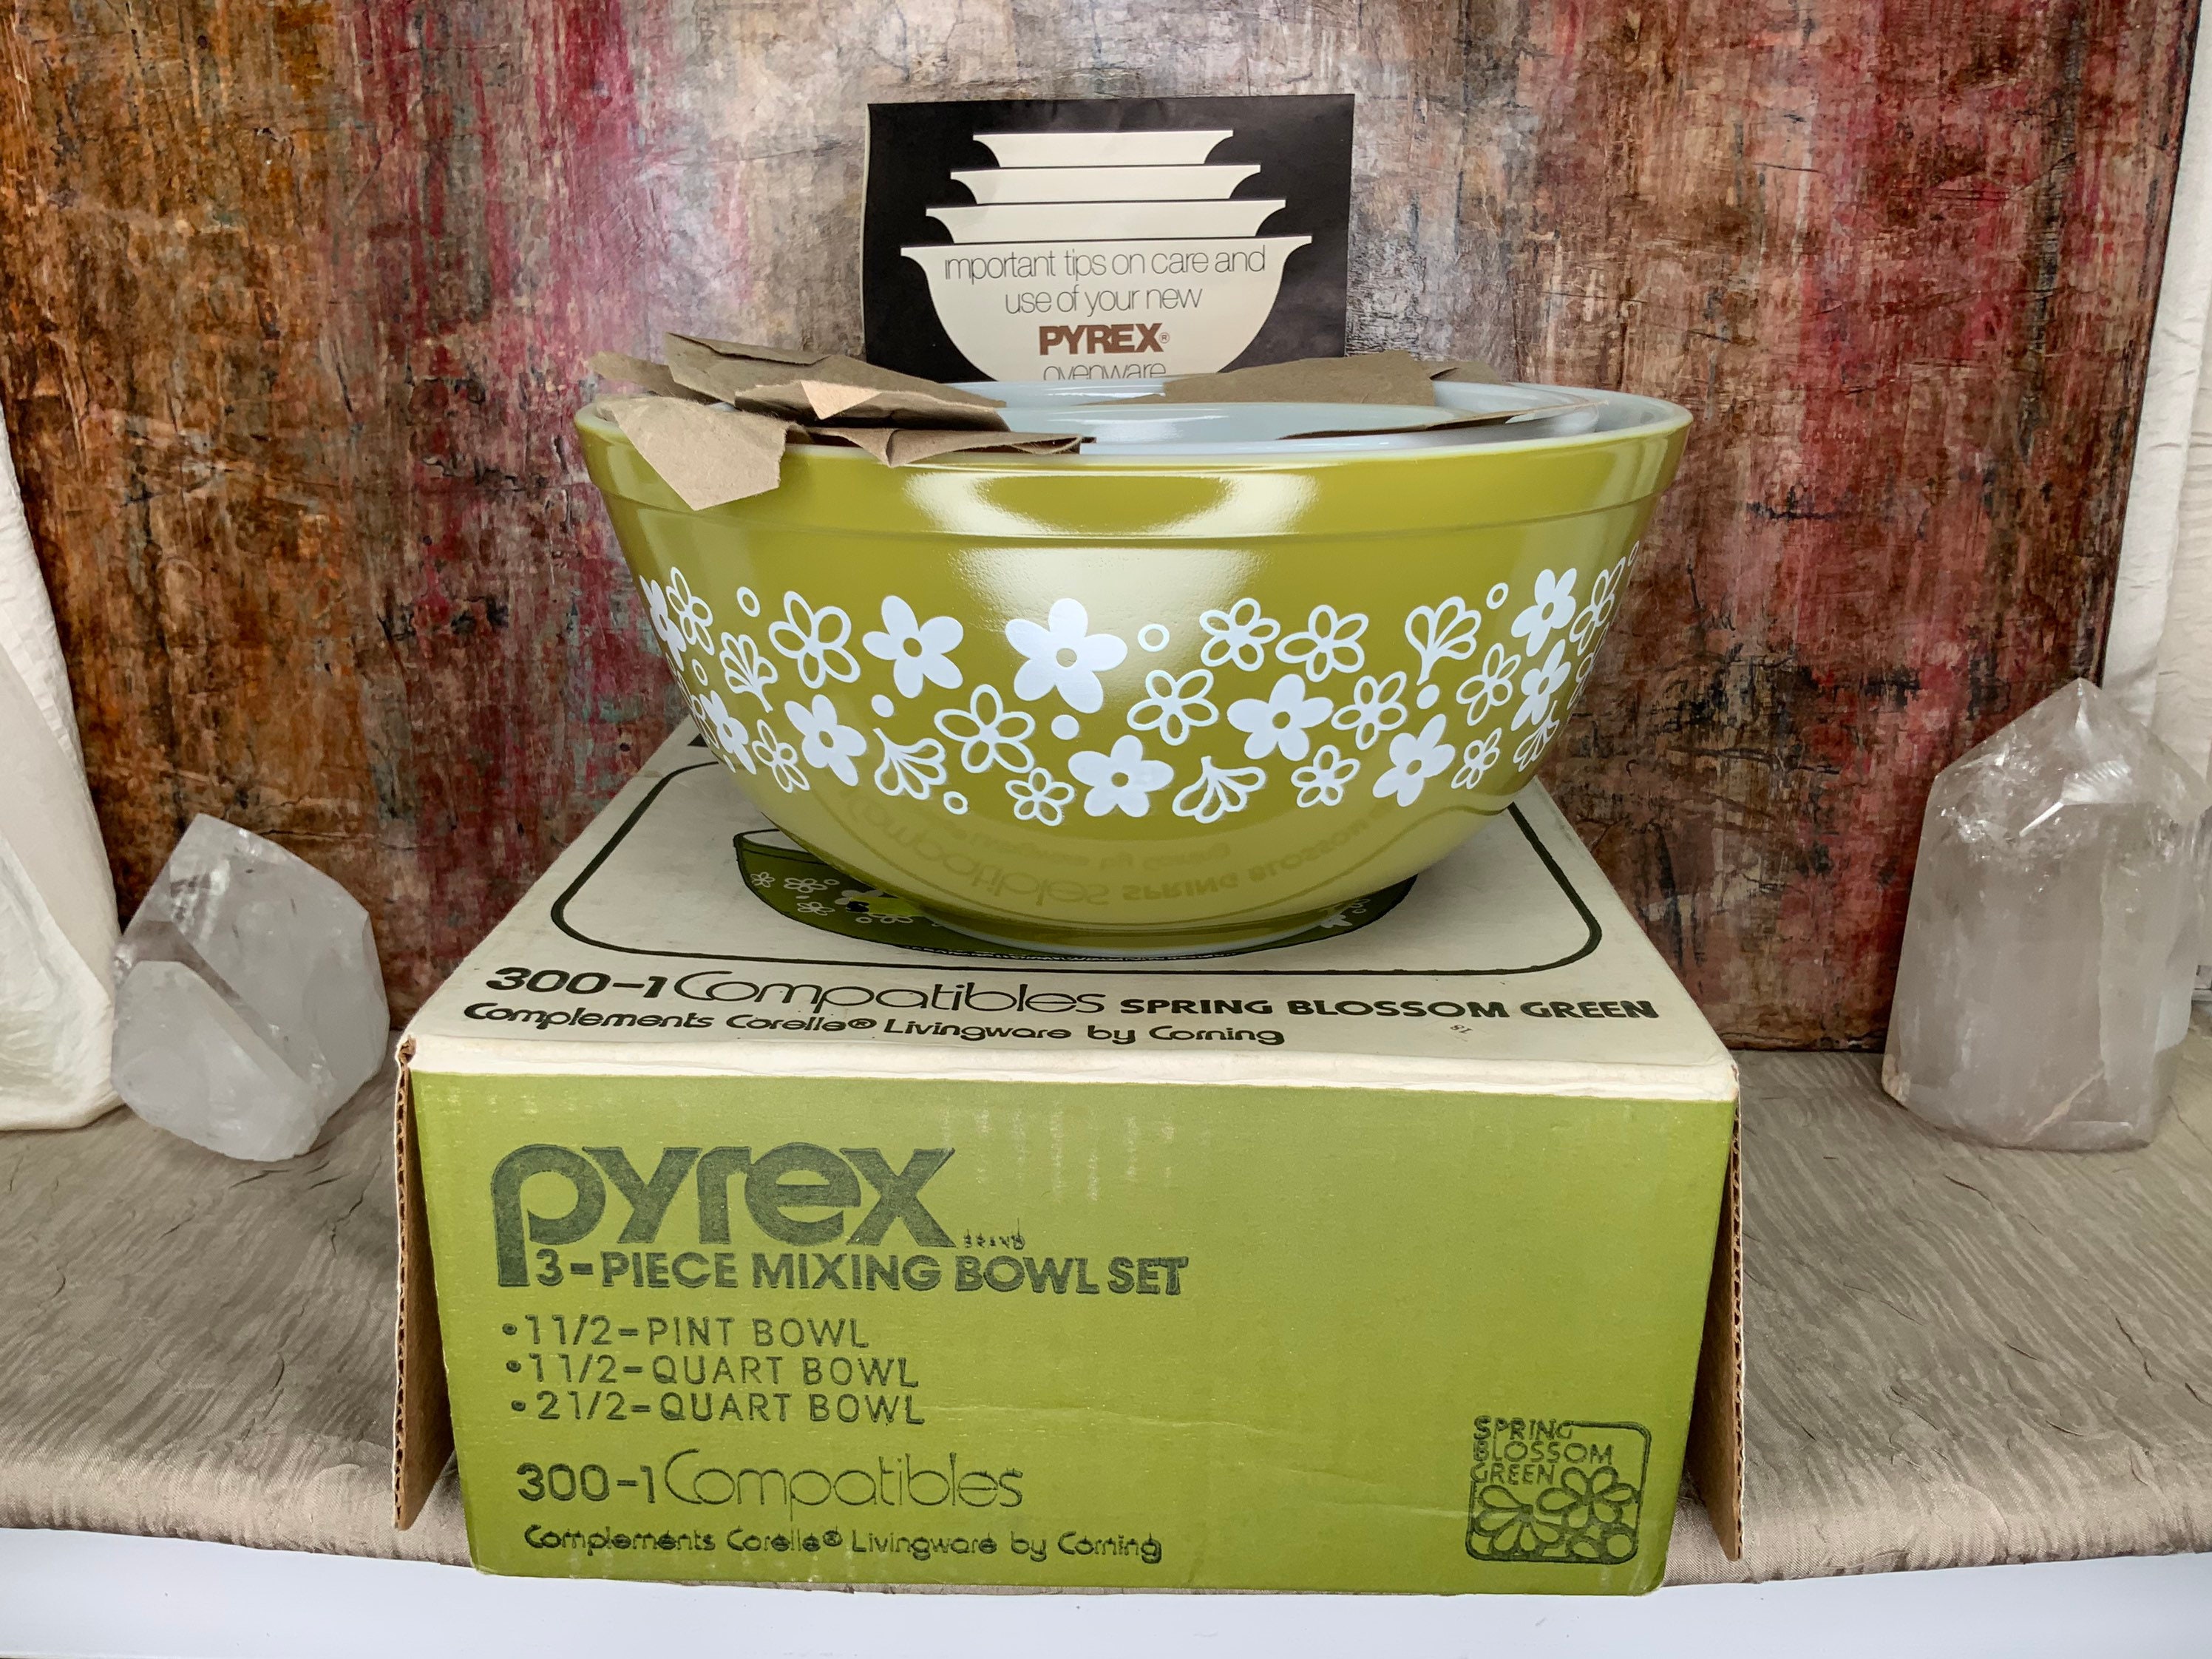 Vintage Pyrex Spring Blossom Green Crazy Daisy Mixing Bowls: 109,900 ppm  Lead (90 is unsafe) + Cadmium too!